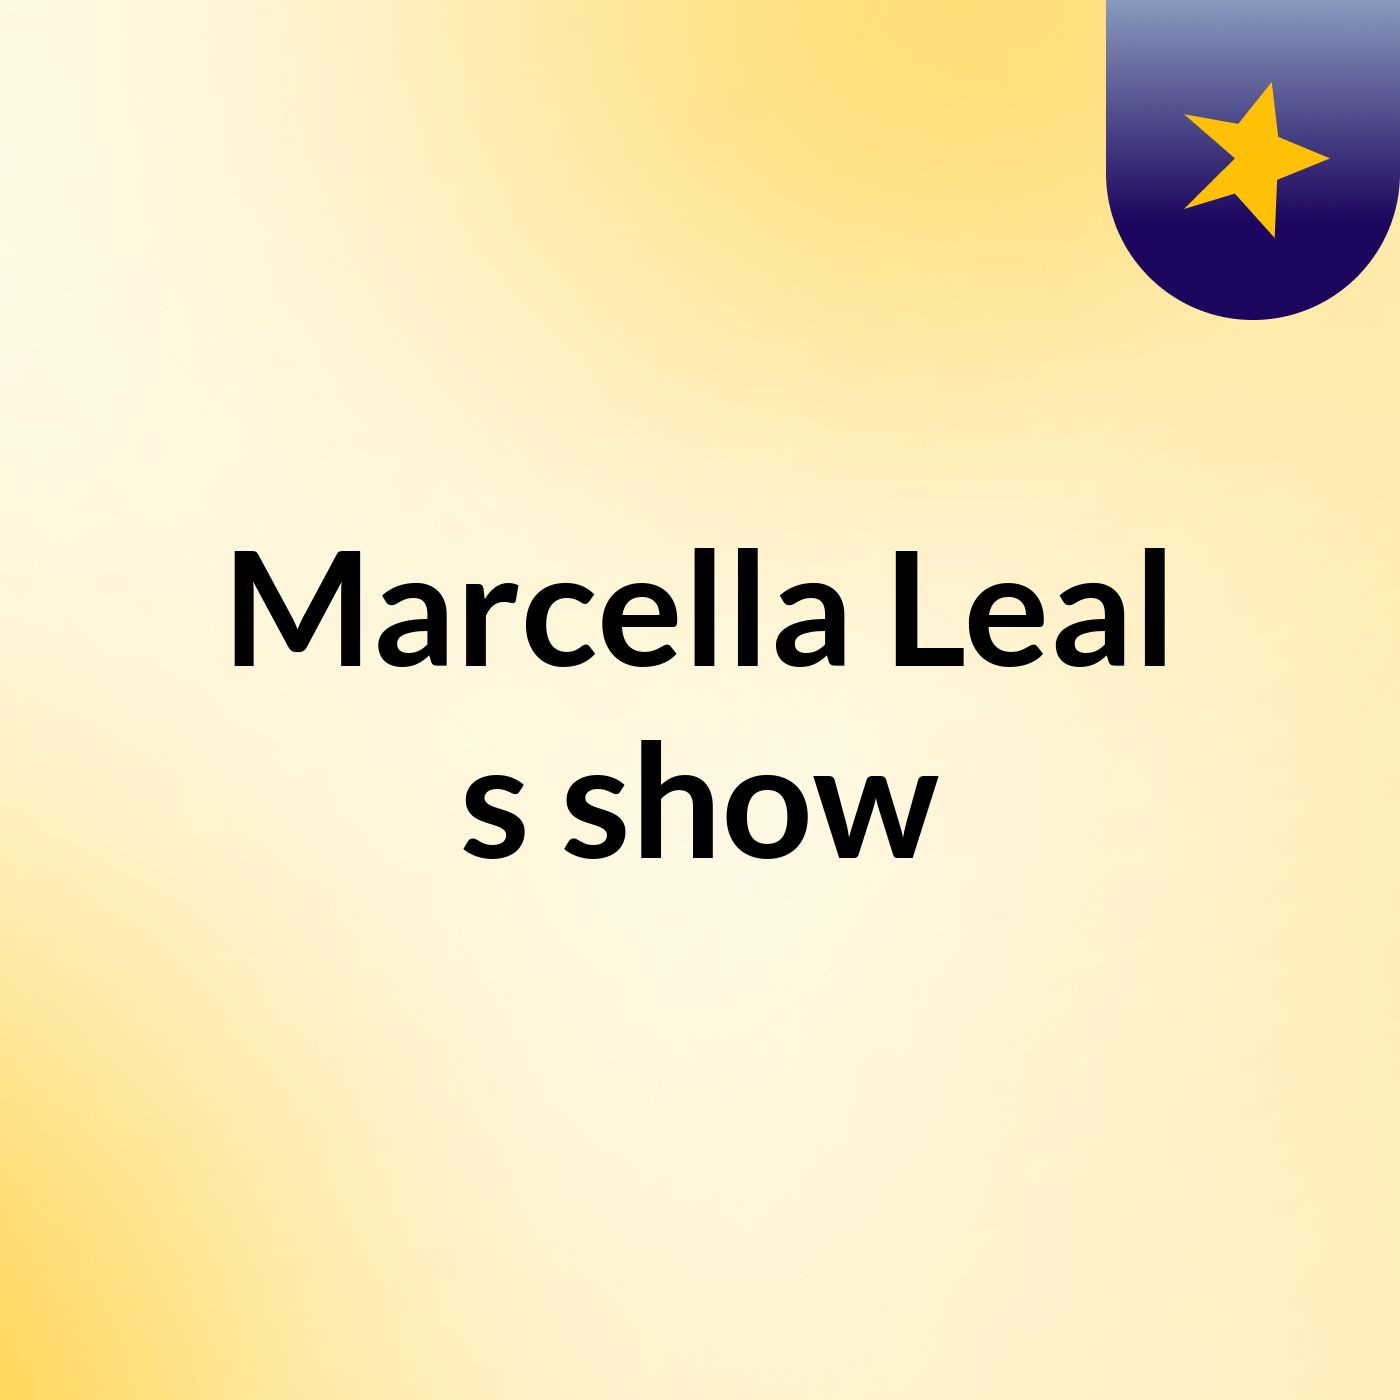 Marcella Leal's show